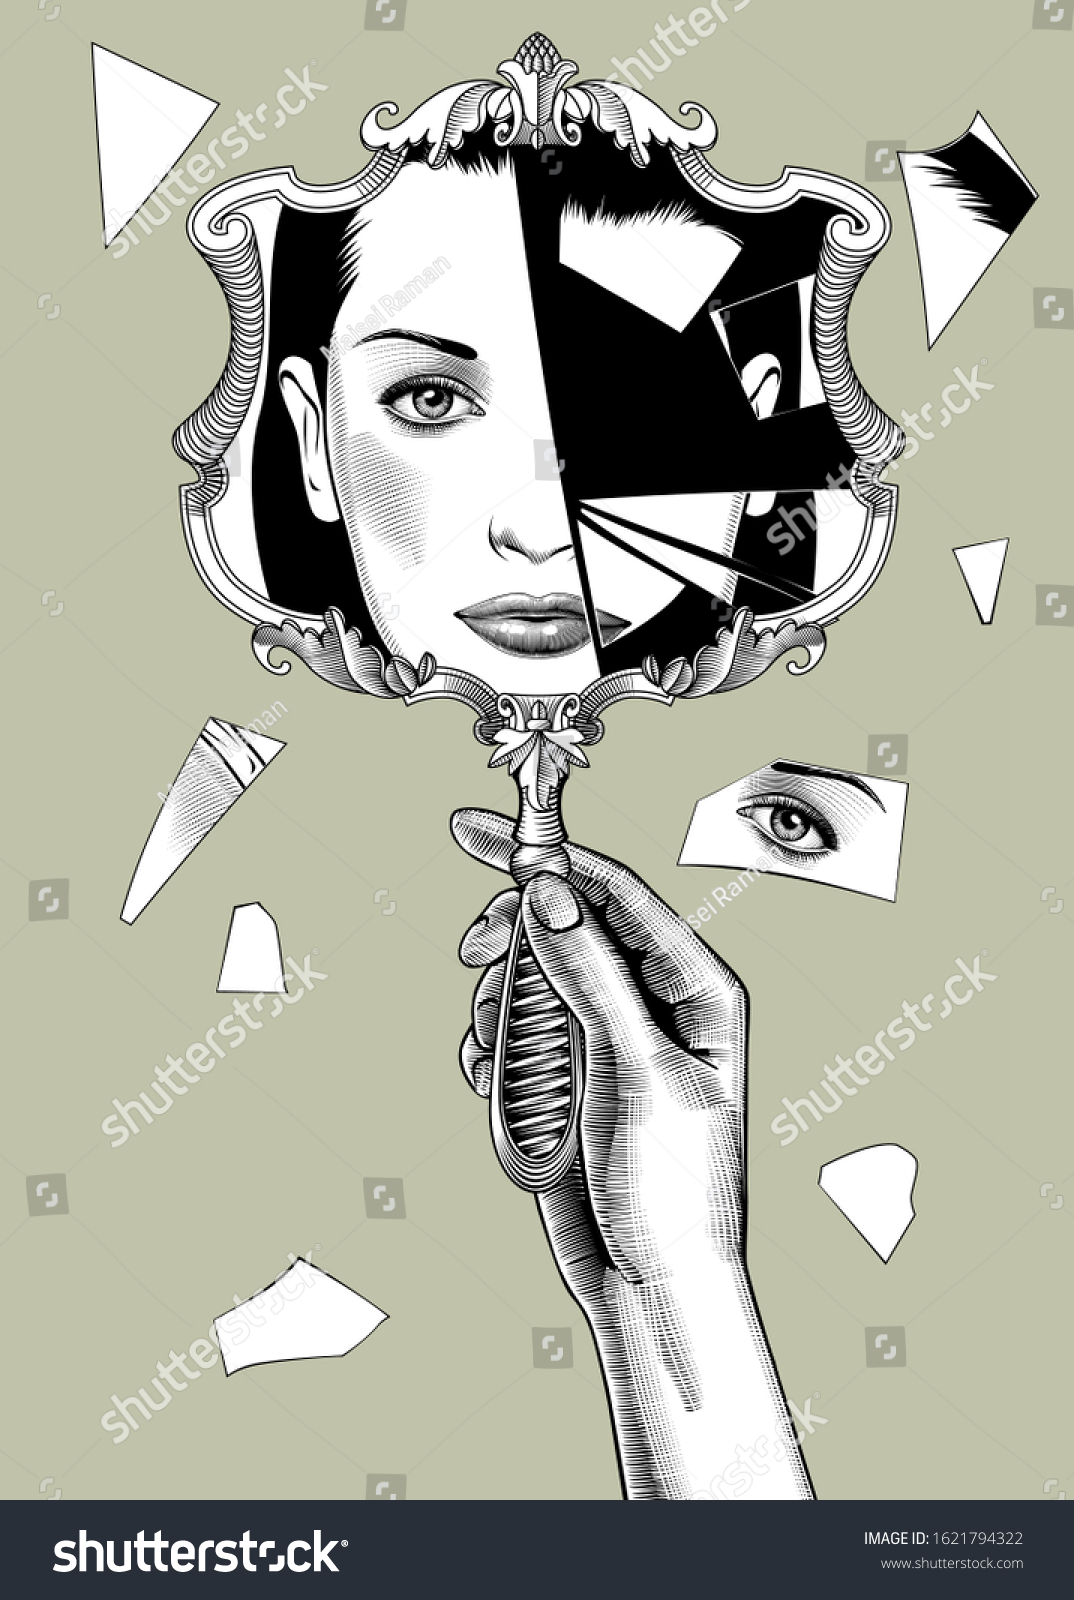 SVG of Female hand holding a broken retro mirror with a decorative frame and woman face reflection in the shards. Vintage engraving stylized drawing. Vector Illustration svg